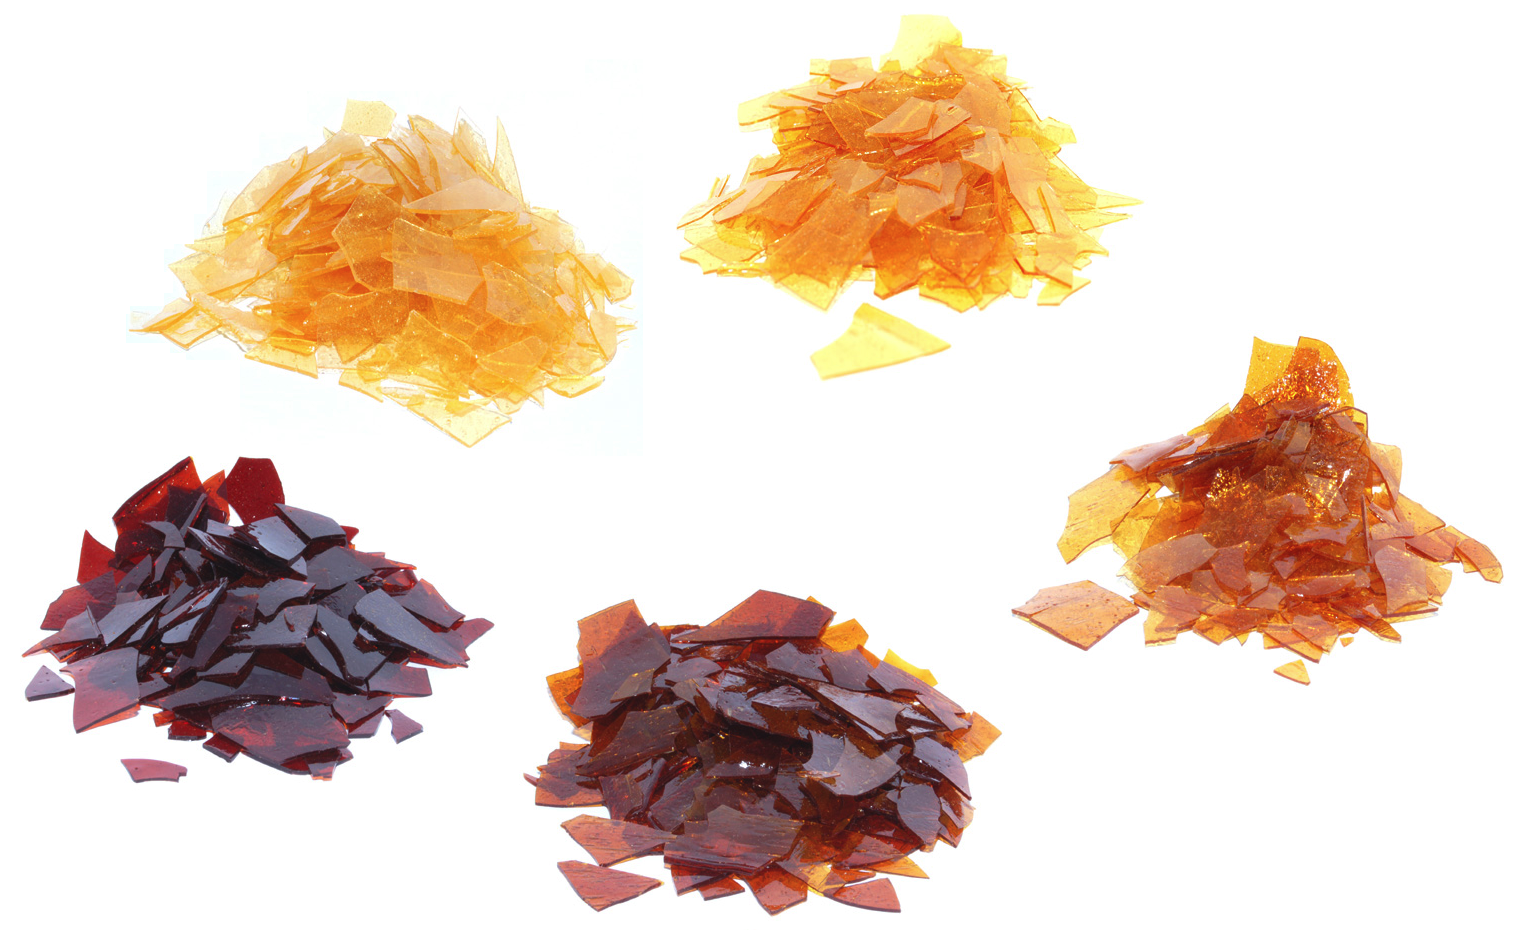 These are varieties of shellac used to make jelly beans.